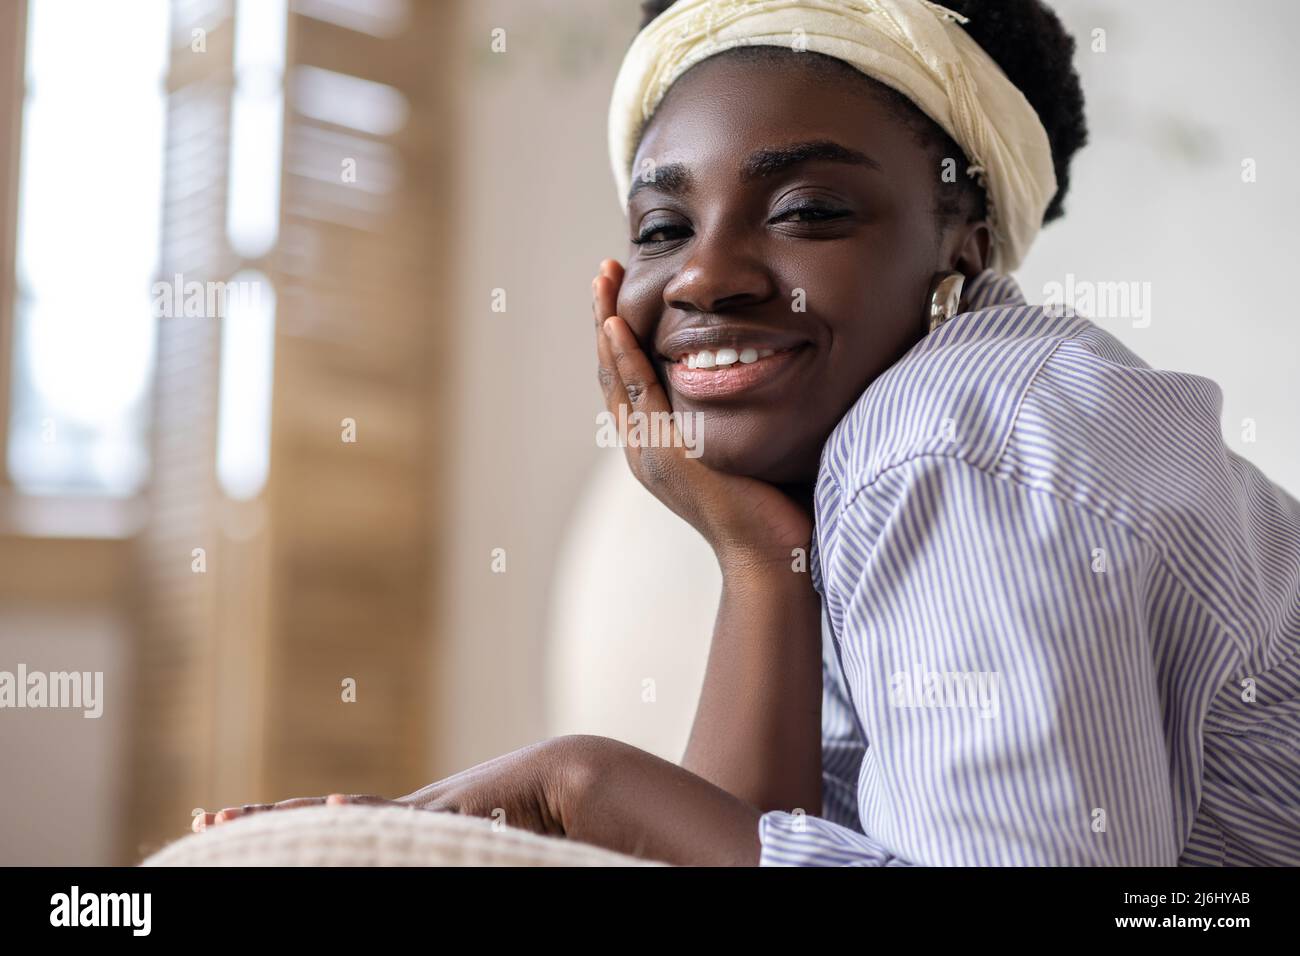 African american woman laying on bed and looking dreamy Stock Photo